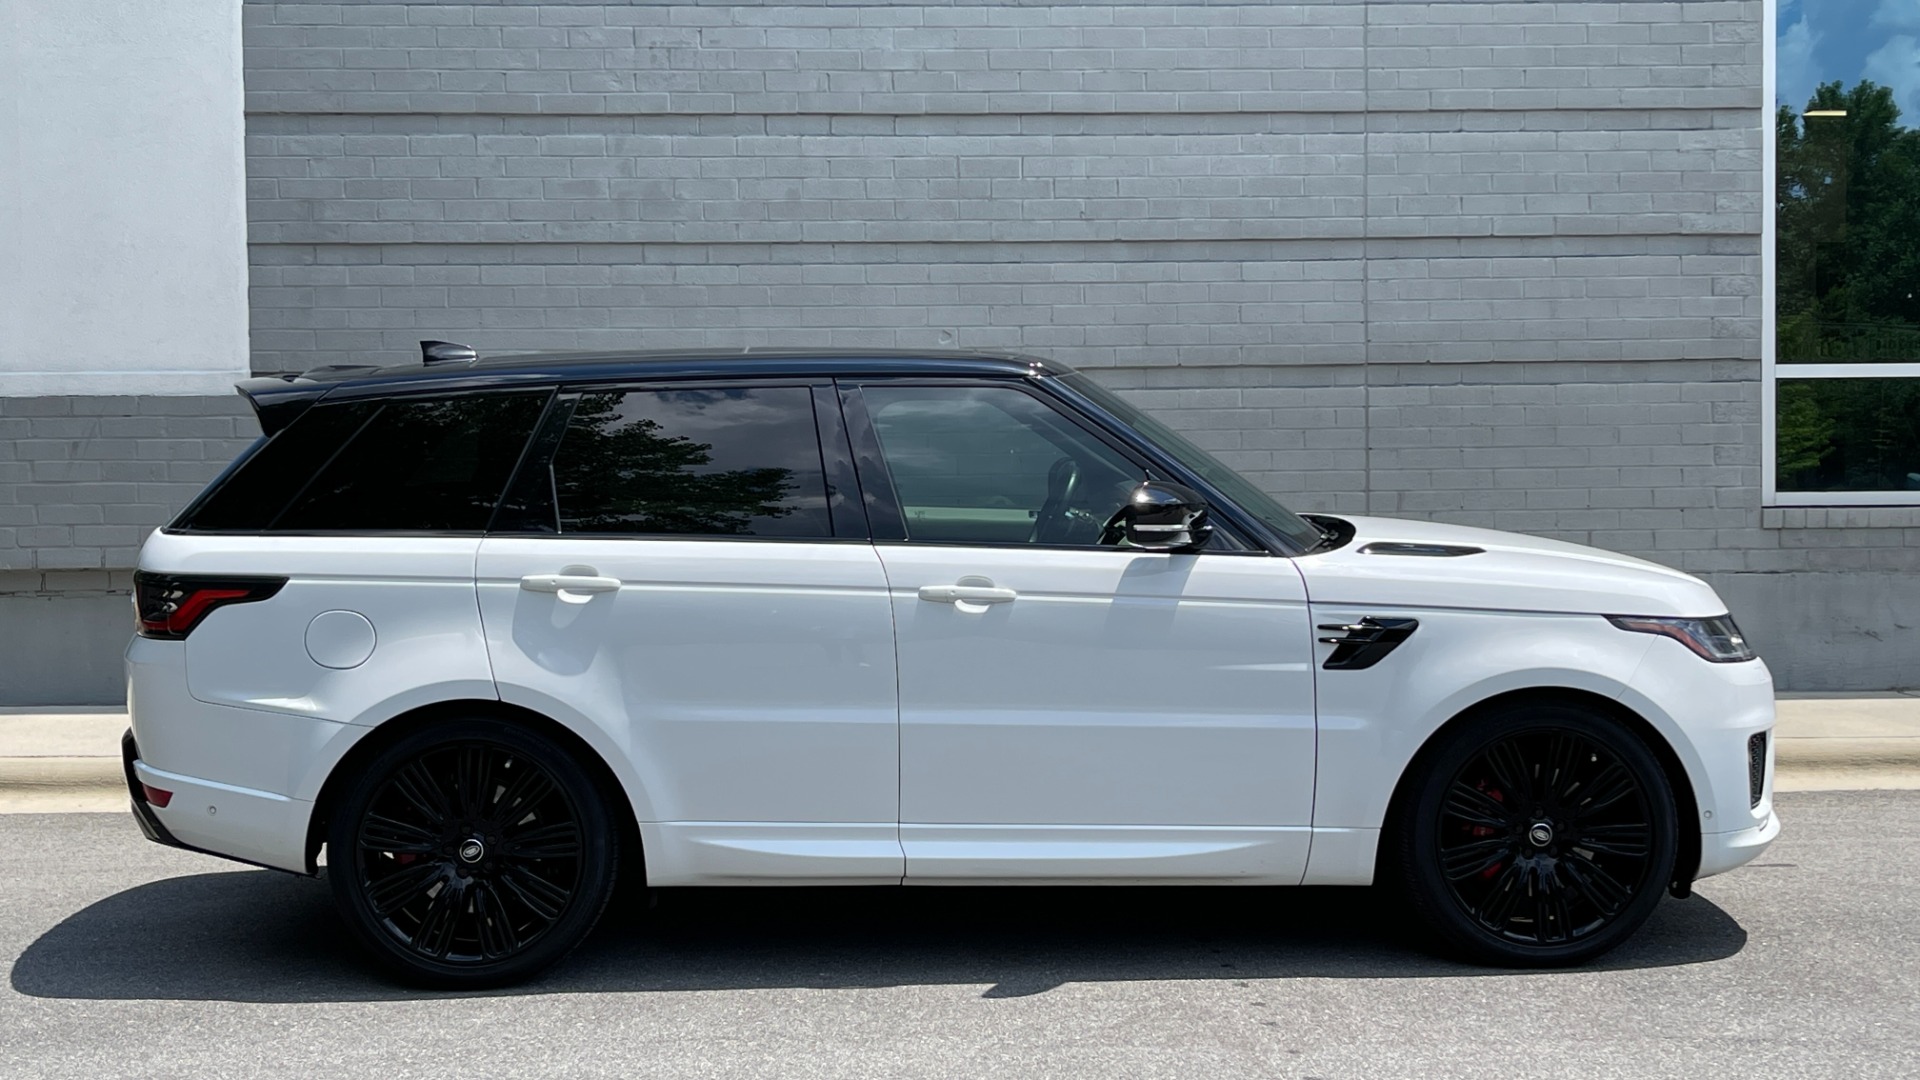 Used 2019 Land Rover Range Rover Sport DYNAMIC / BLACKOUT PACK / VISION ASSIST / 22IN WHEELS for sale $81,999 at Formula Imports in Charlotte NC 28227 3